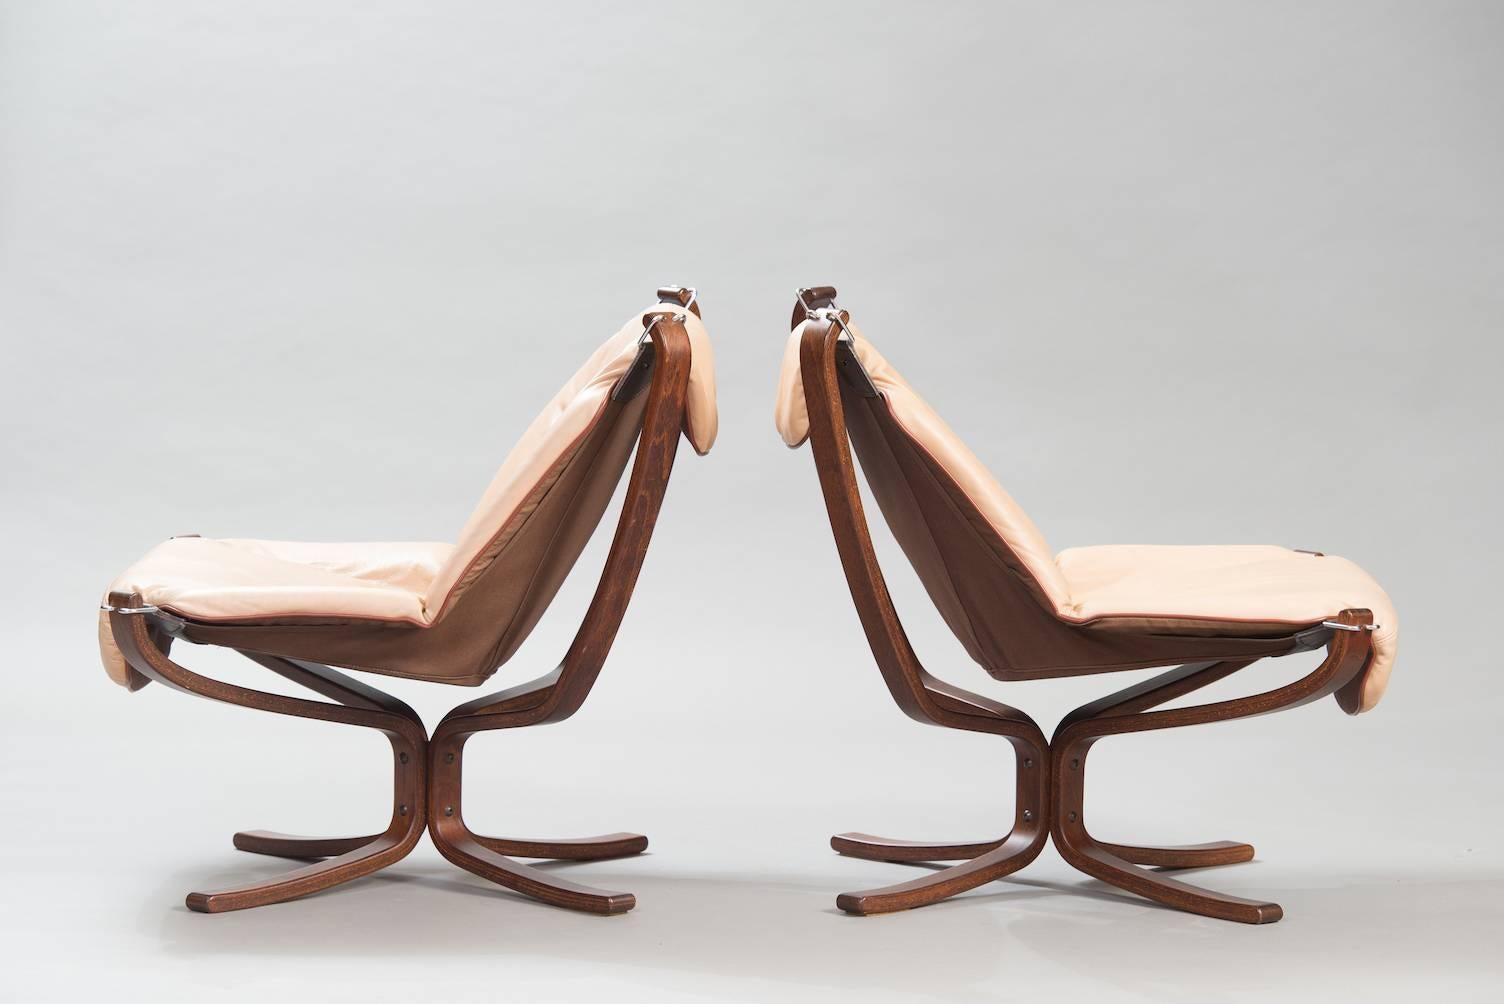 One pair of beige leather “Falcon” chairs.